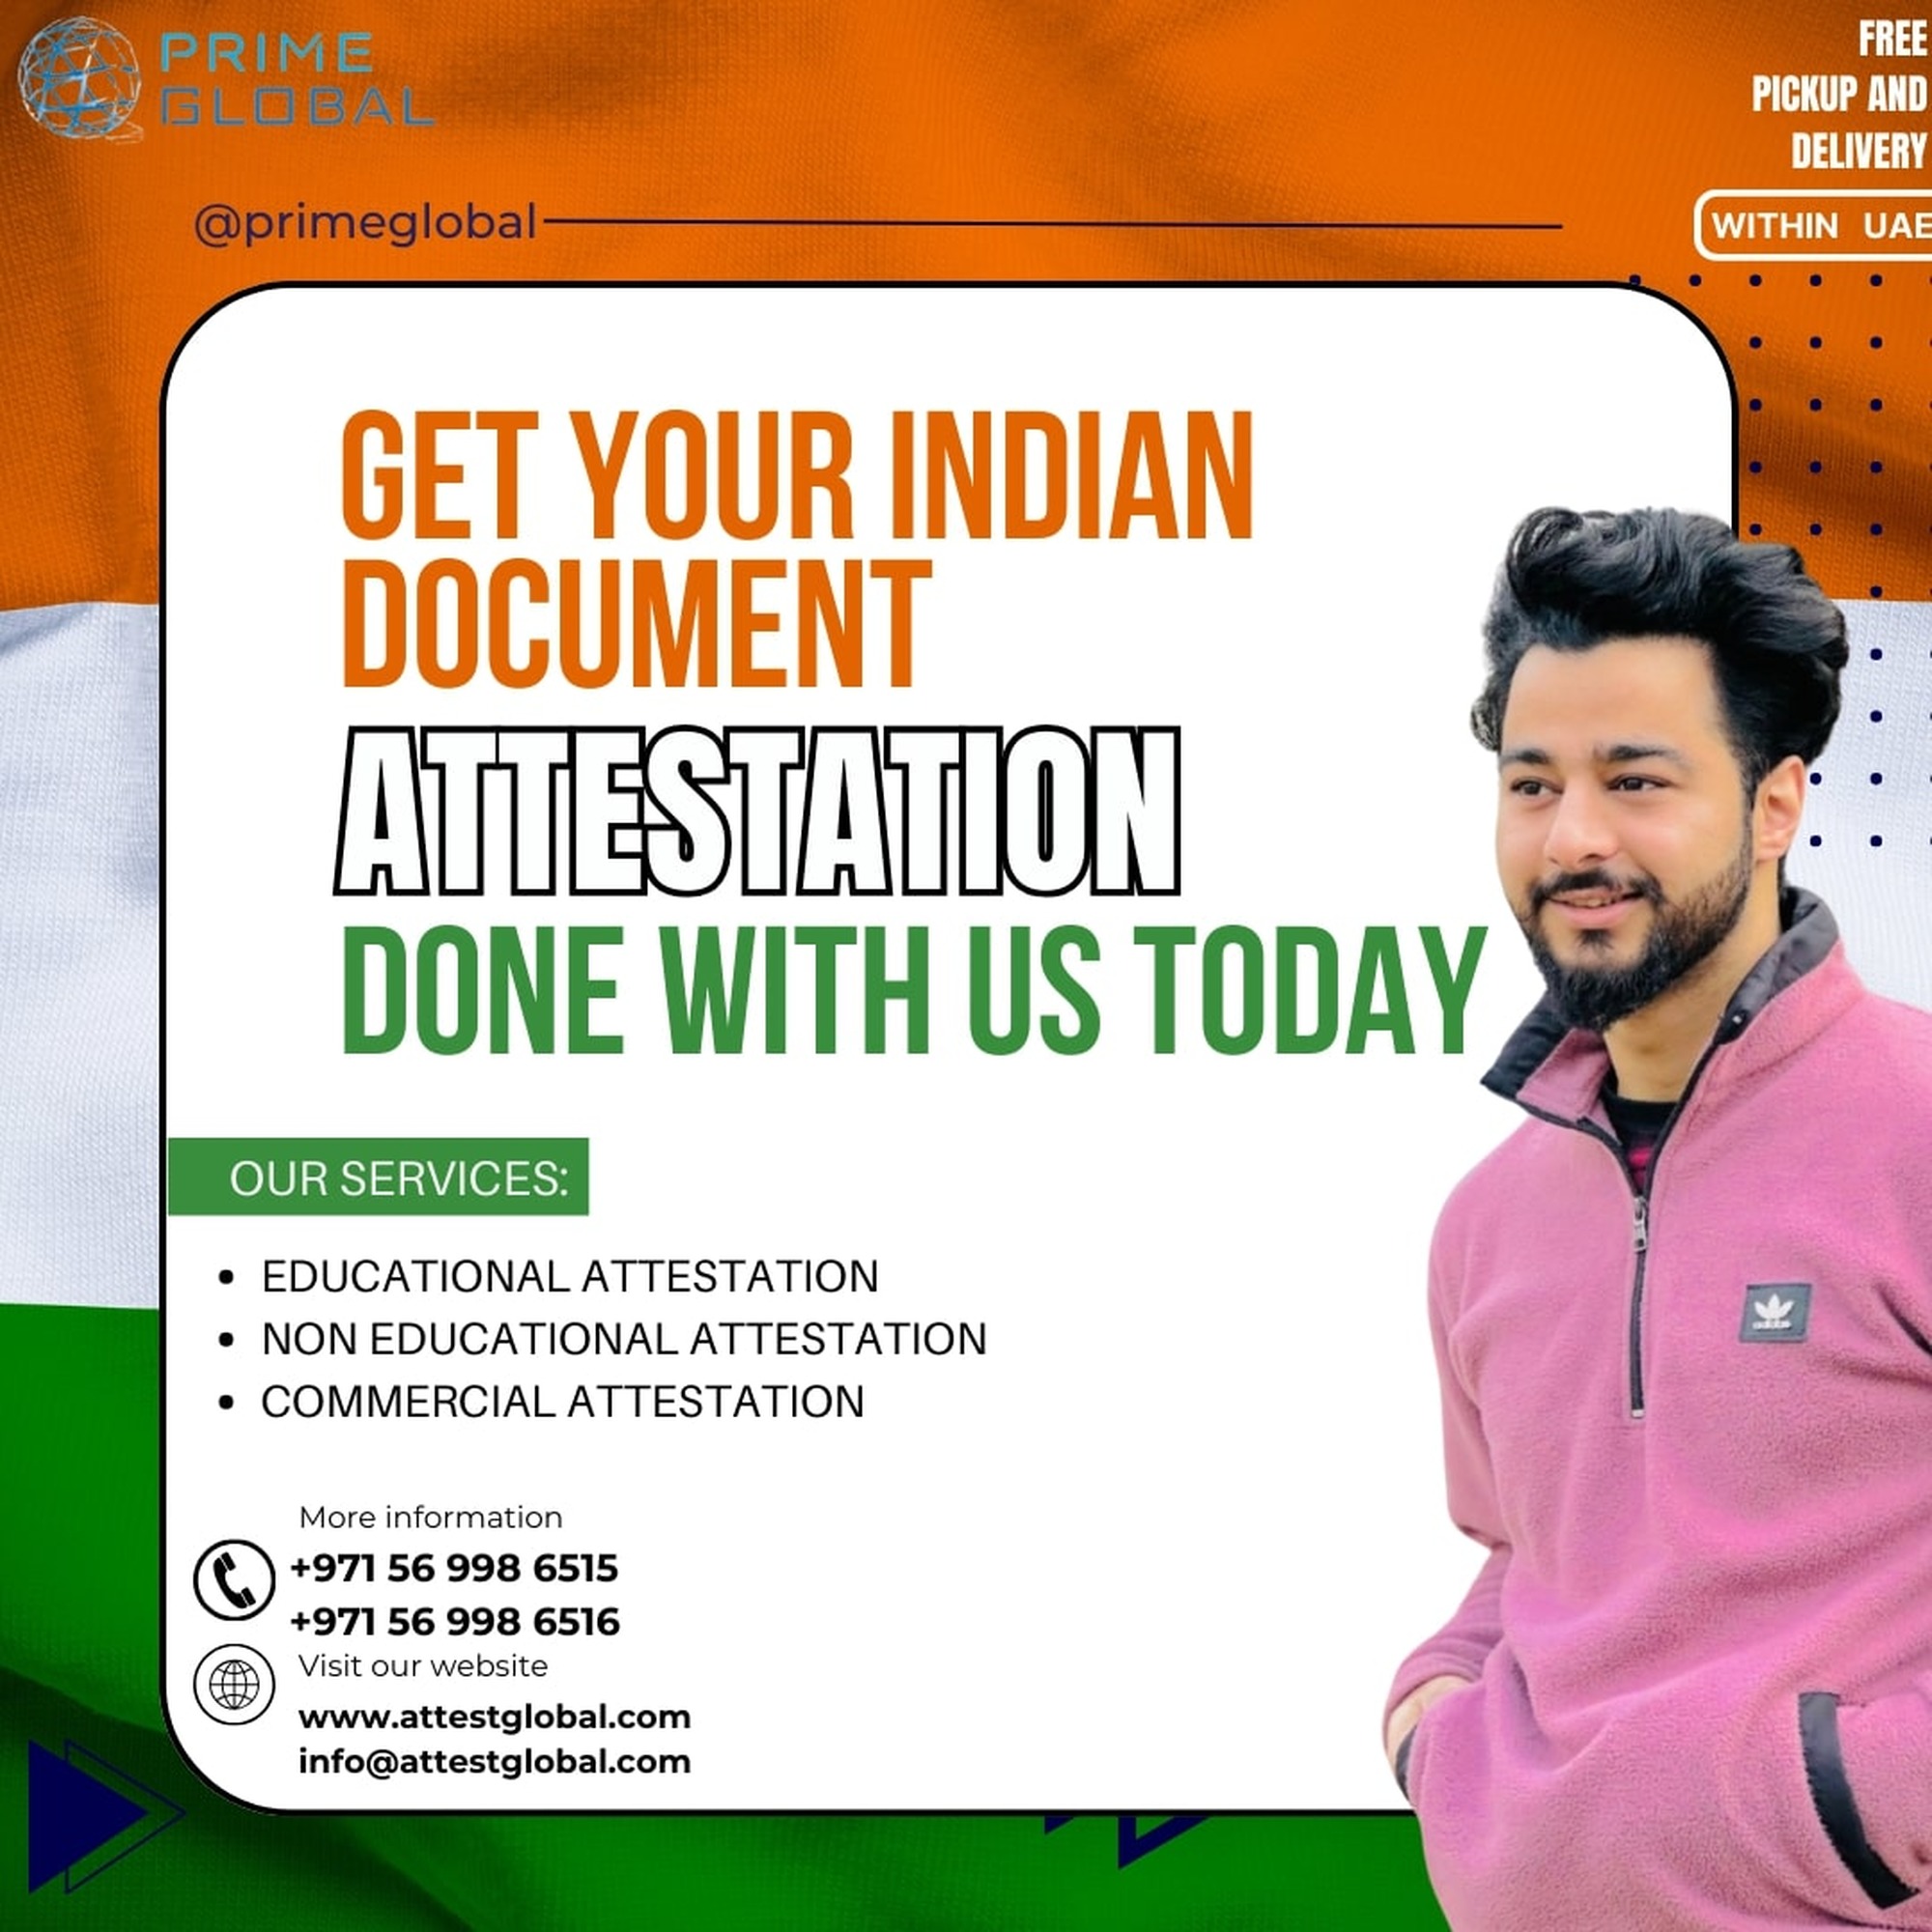  Hassle Free: India Certificate attestation services in the UAE